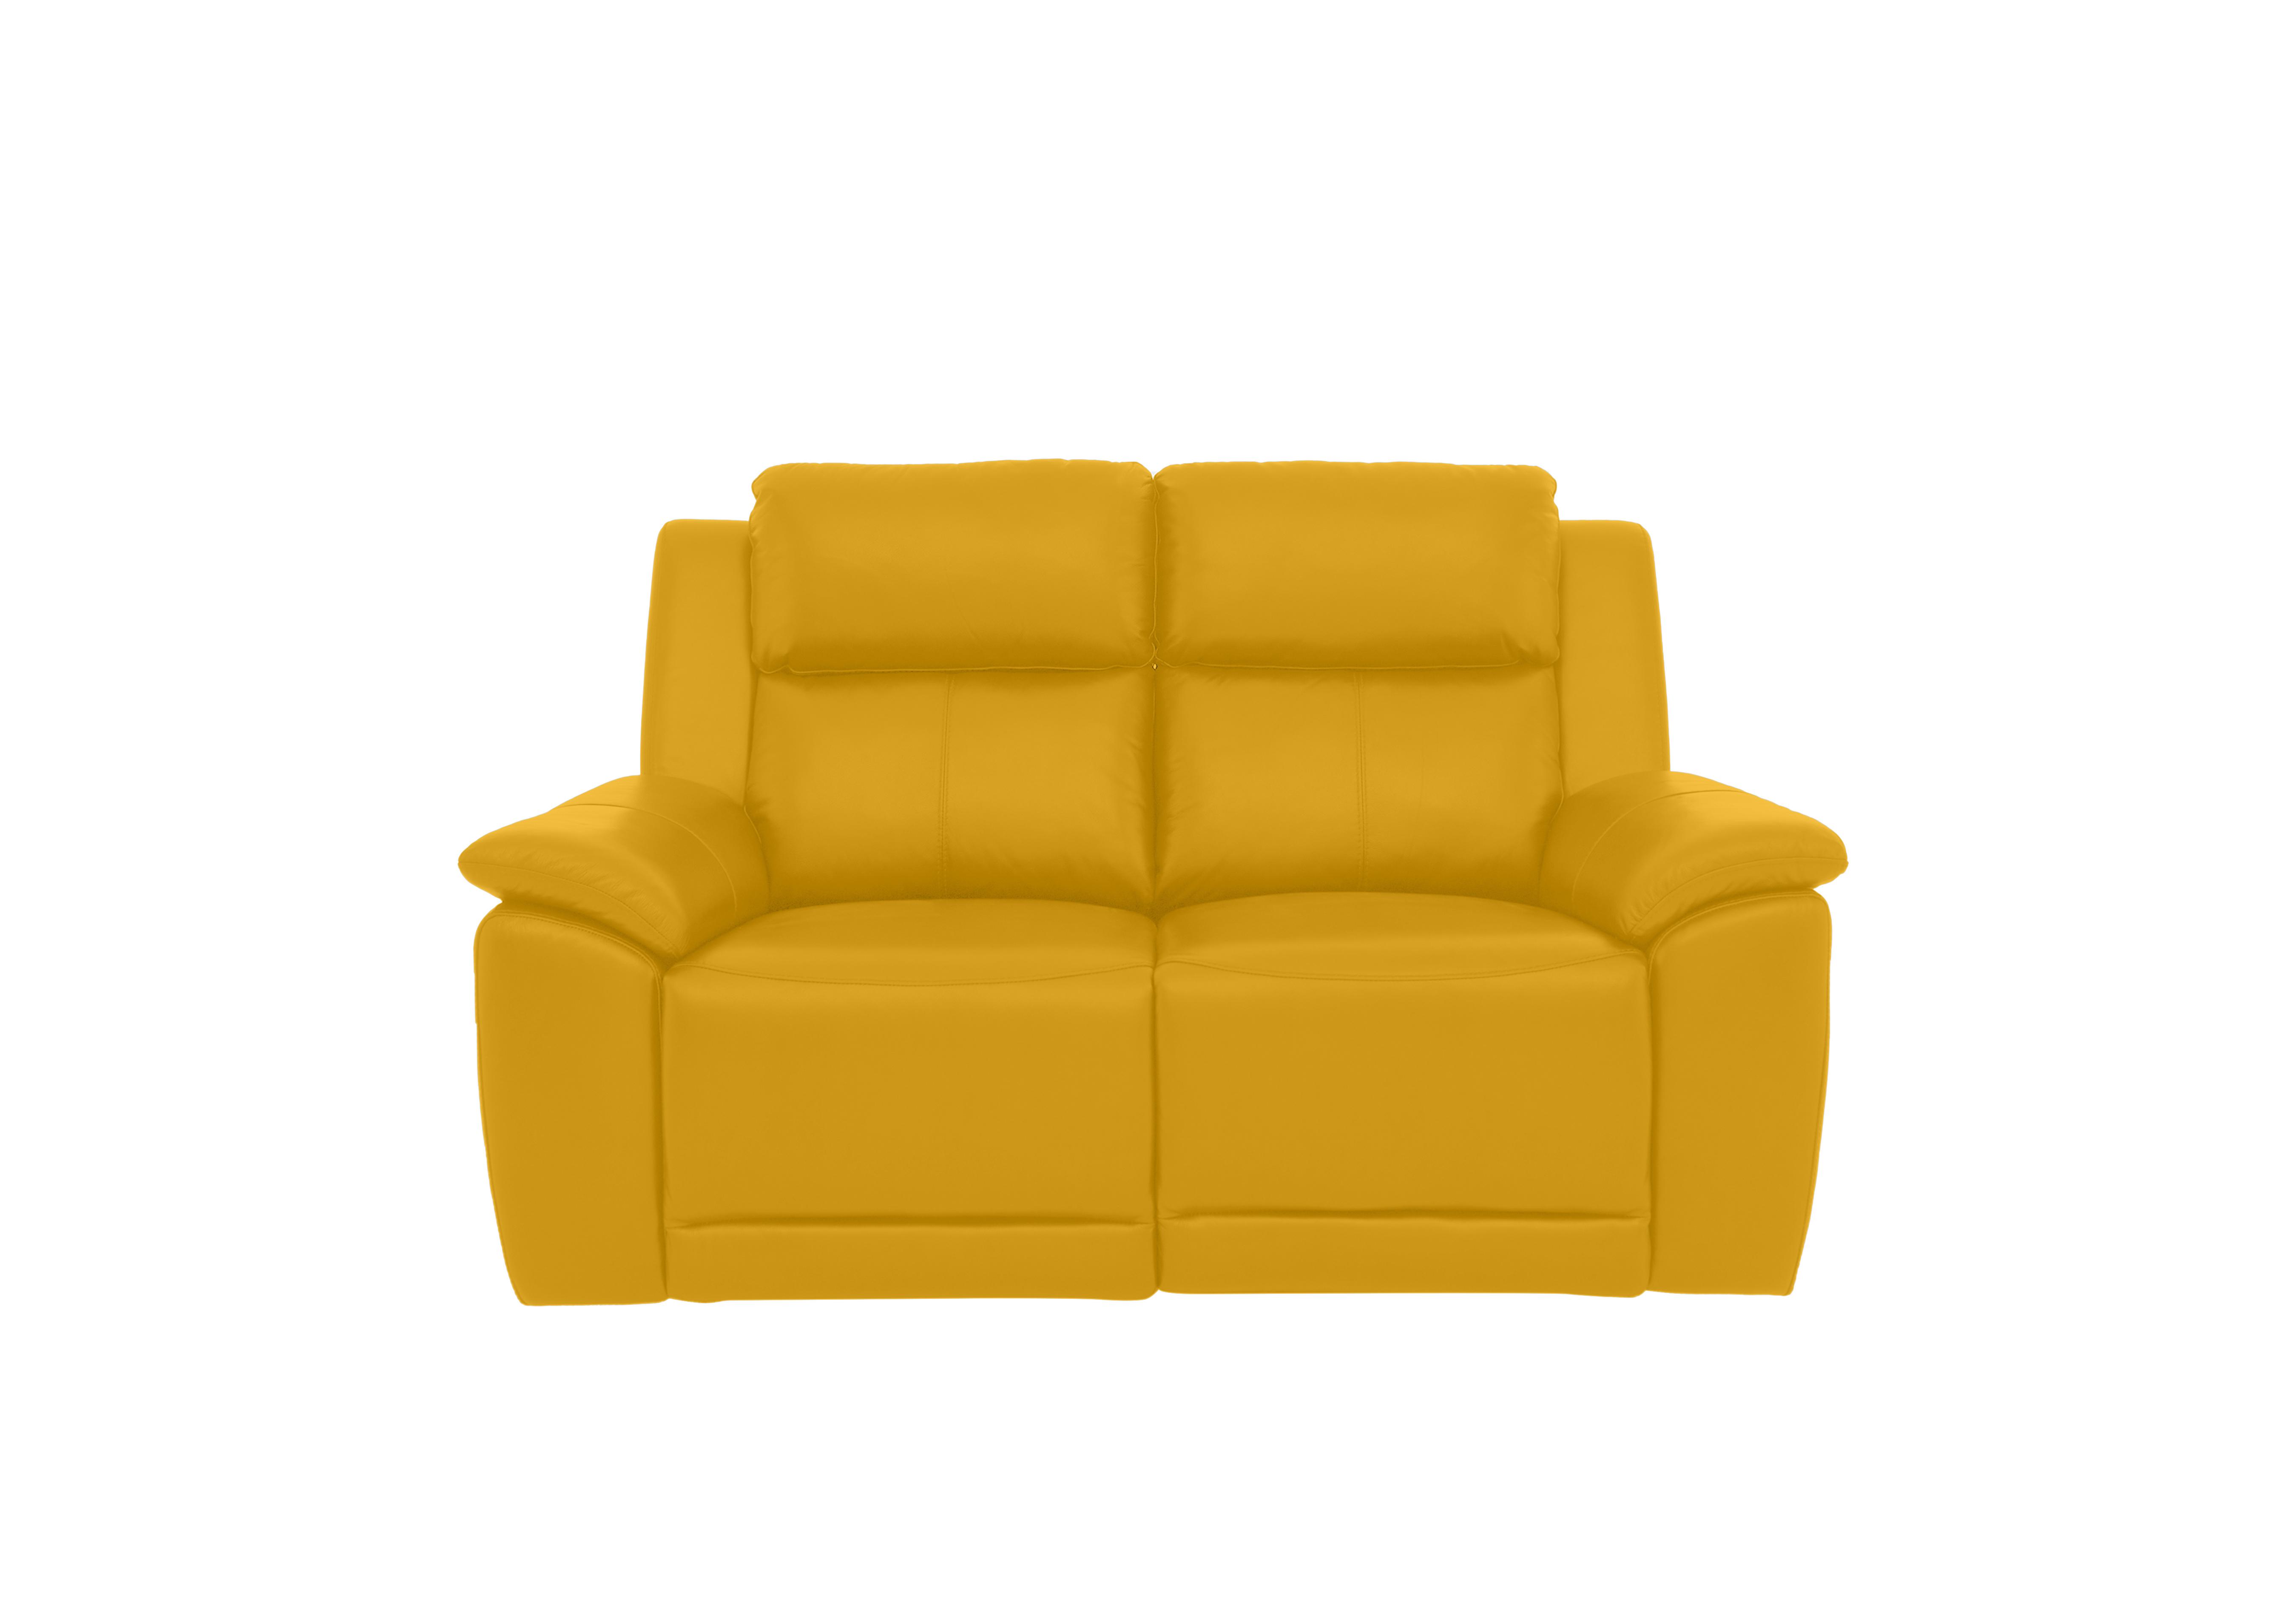 Utah 2 Seater Leather Power Recliner Sofa with Power Headrests and Power Lumbar in Giallo Le-9310 on Furniture Village